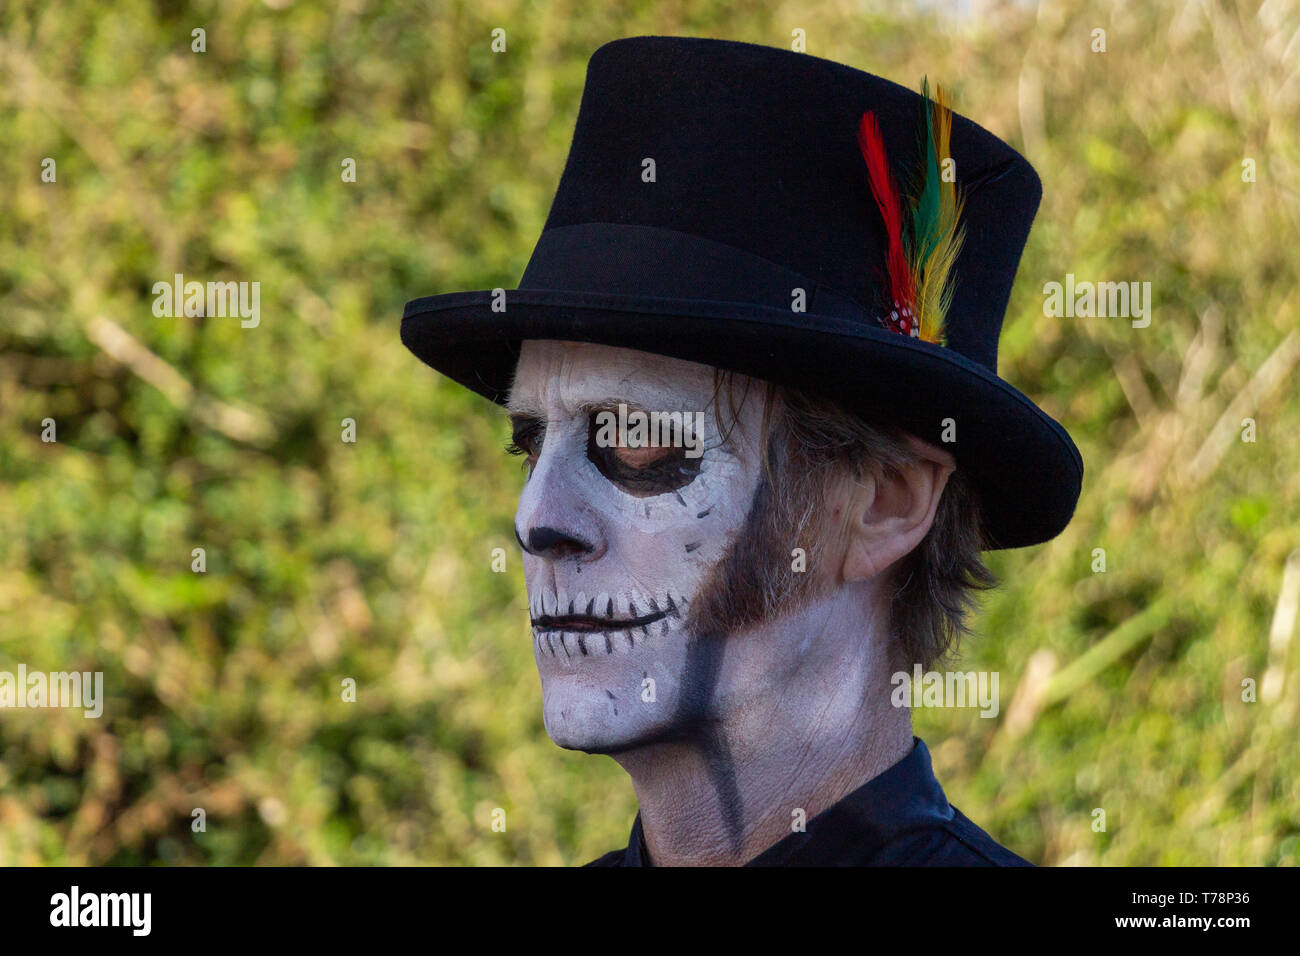 male jazz festival character with skull makeup Stock Photo